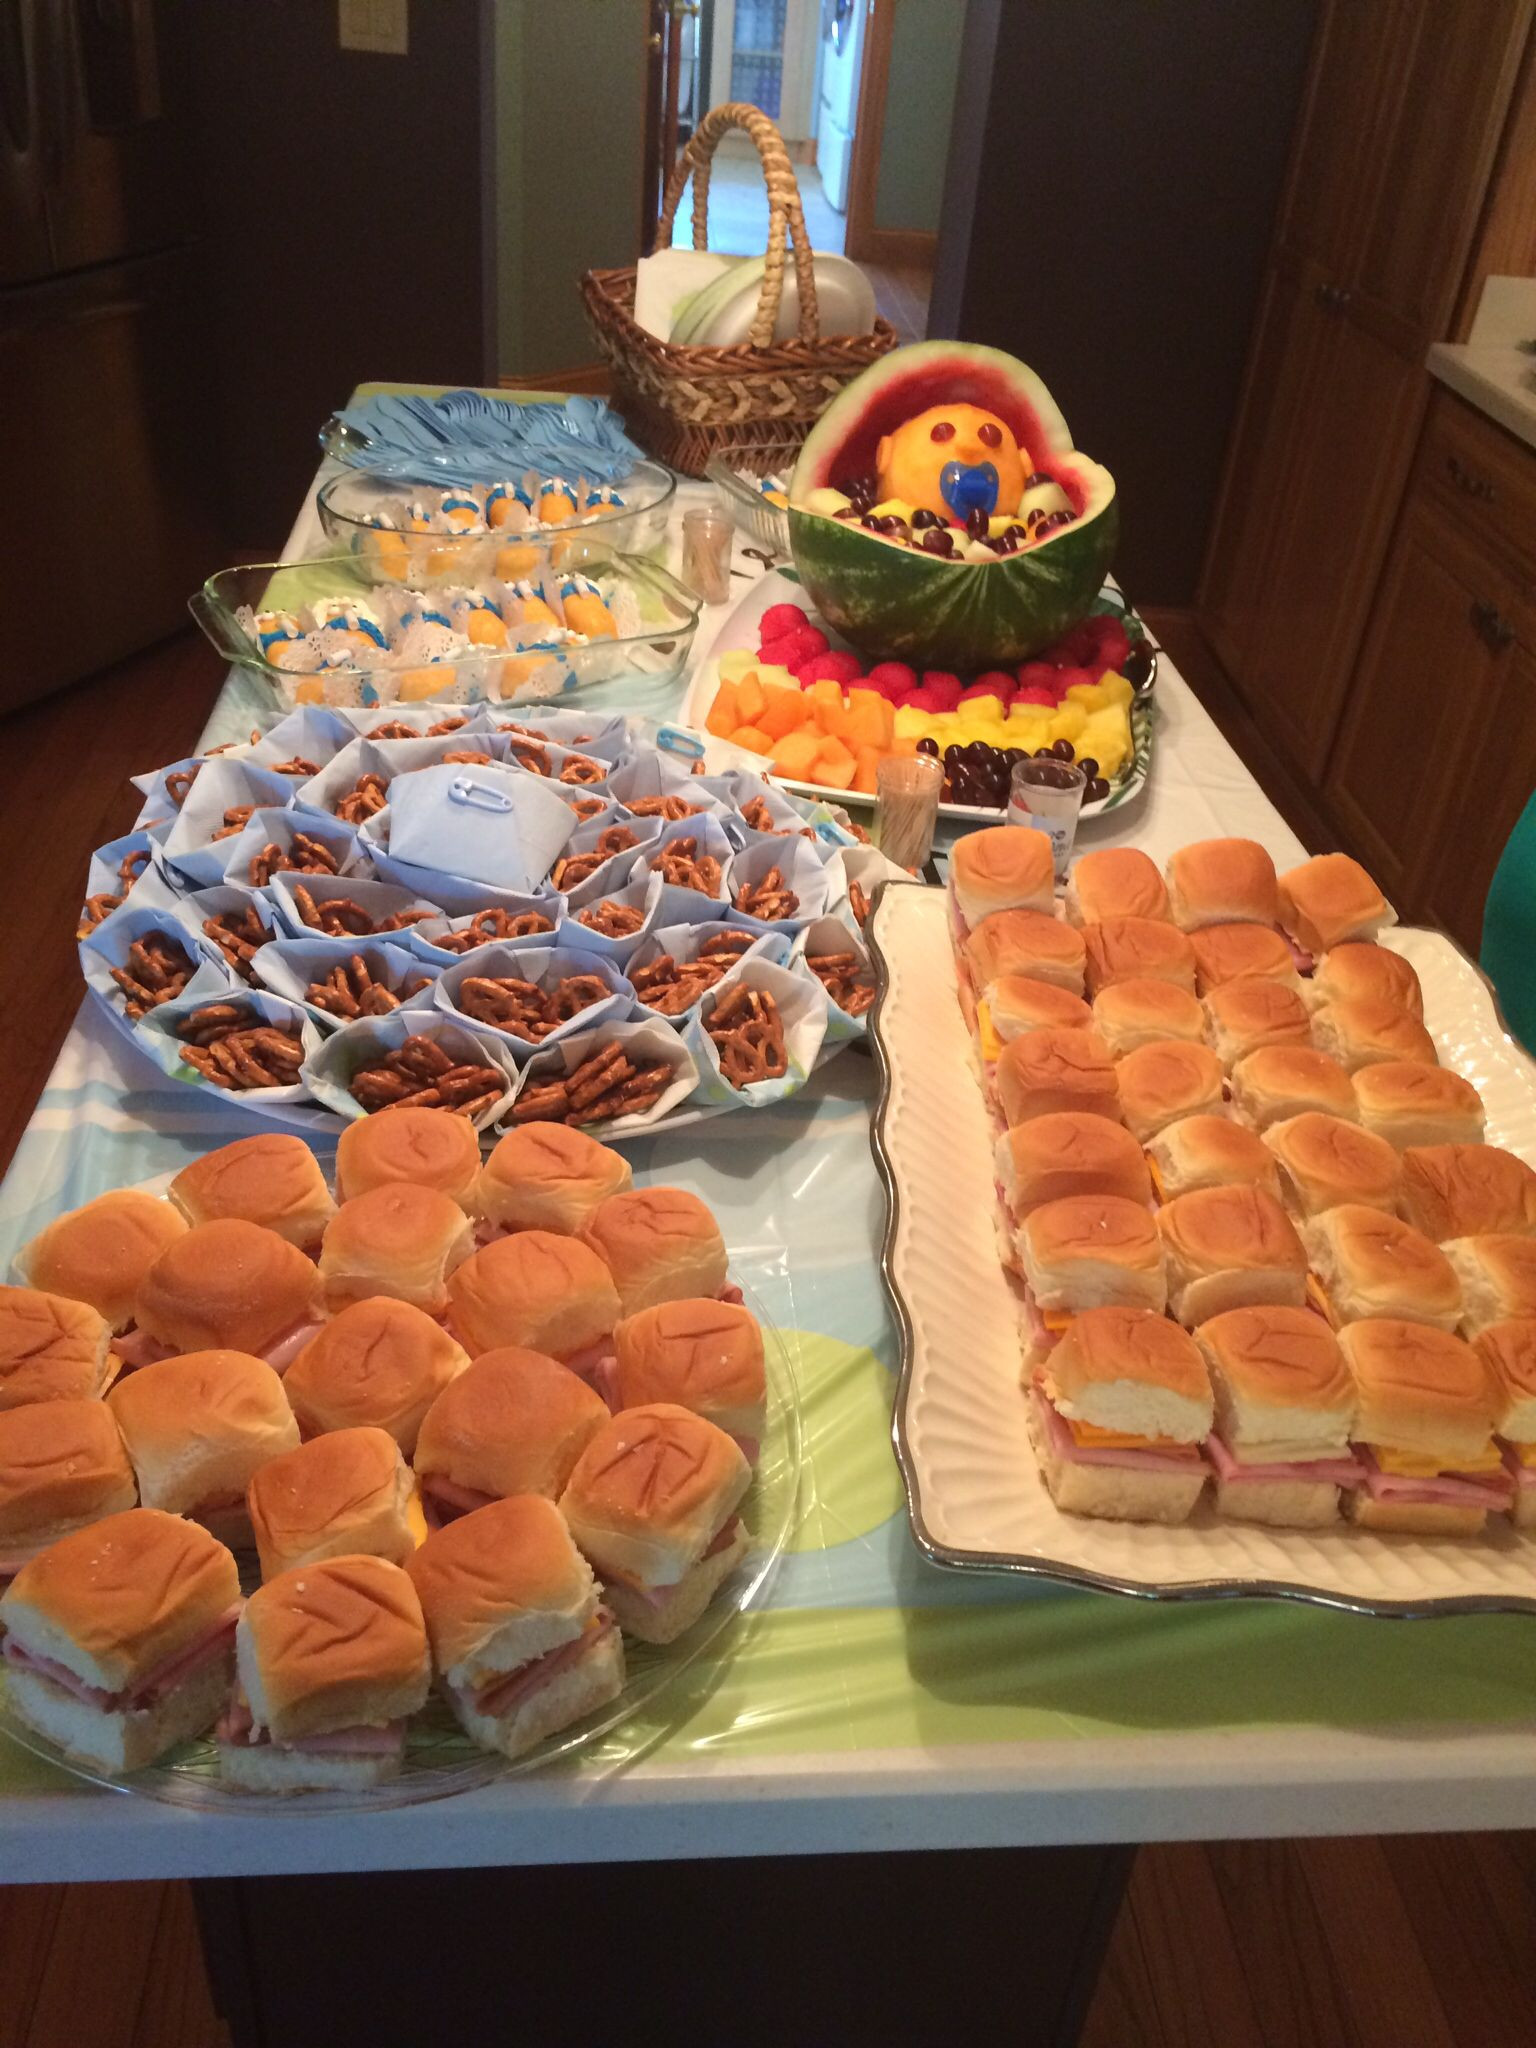 Party Food Ideas For Baby Shower
 Baby Shower food on a bud Sandwiches on Hawaiian rolls